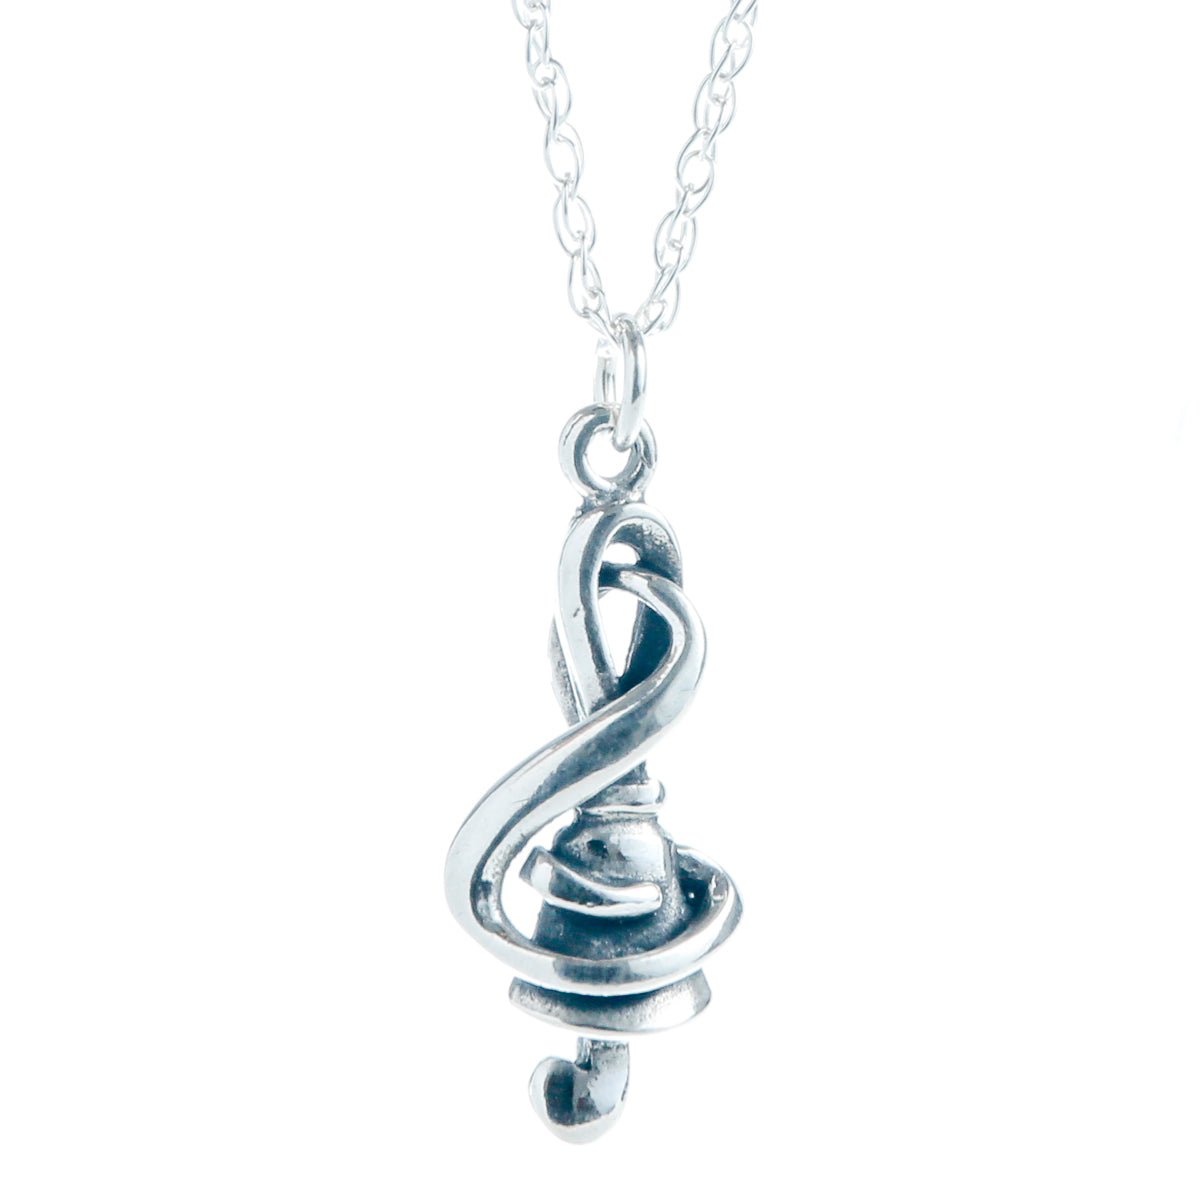 Charm - handbell and treble clef, sterling silver (FMI)